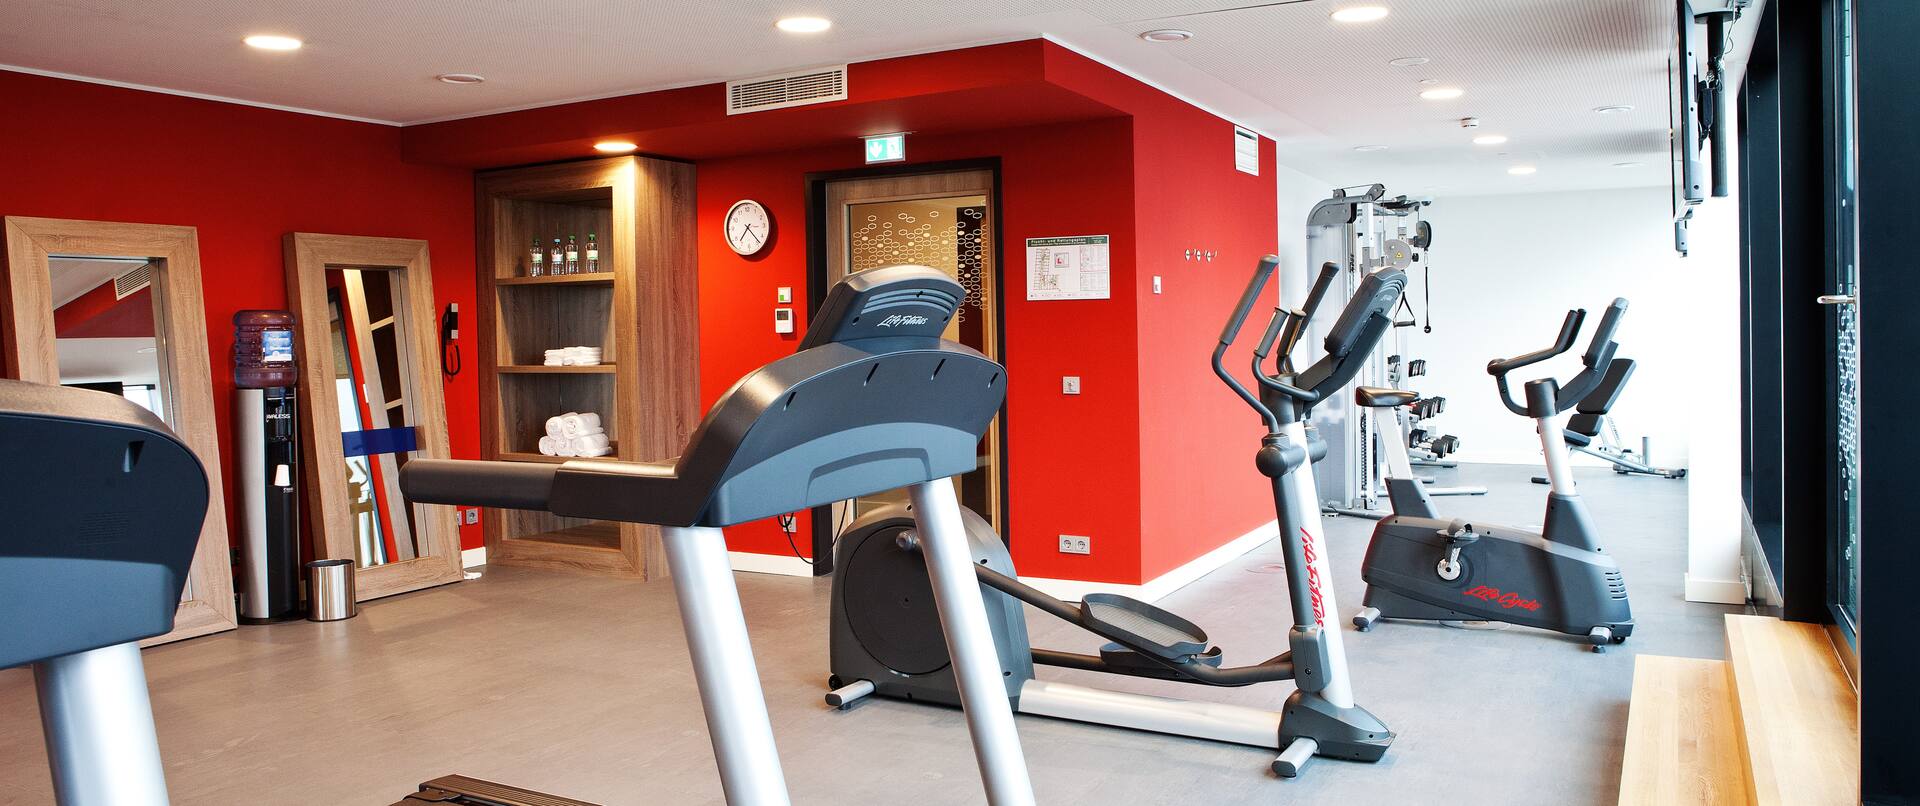 Fitness Area with treadmills and ellipticals 